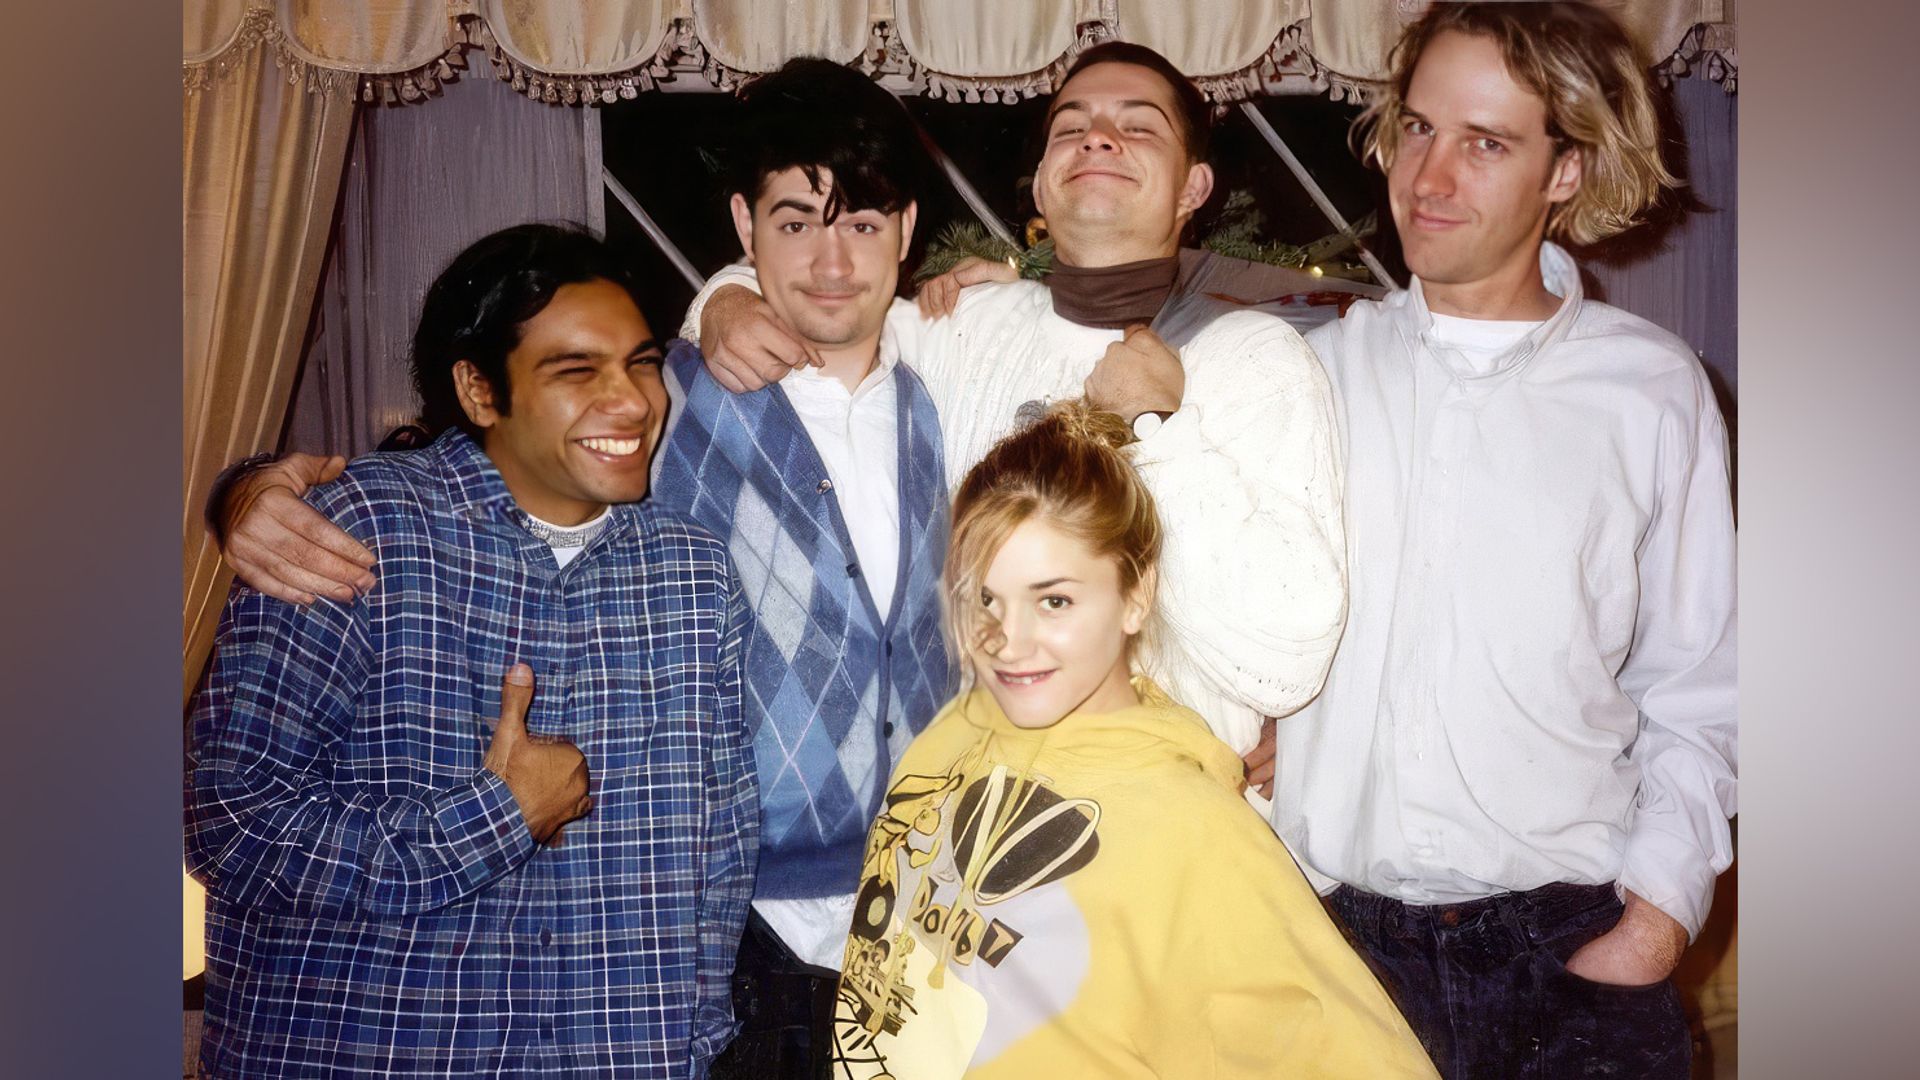 Gwen Stefani and the band No Doubt in the early years